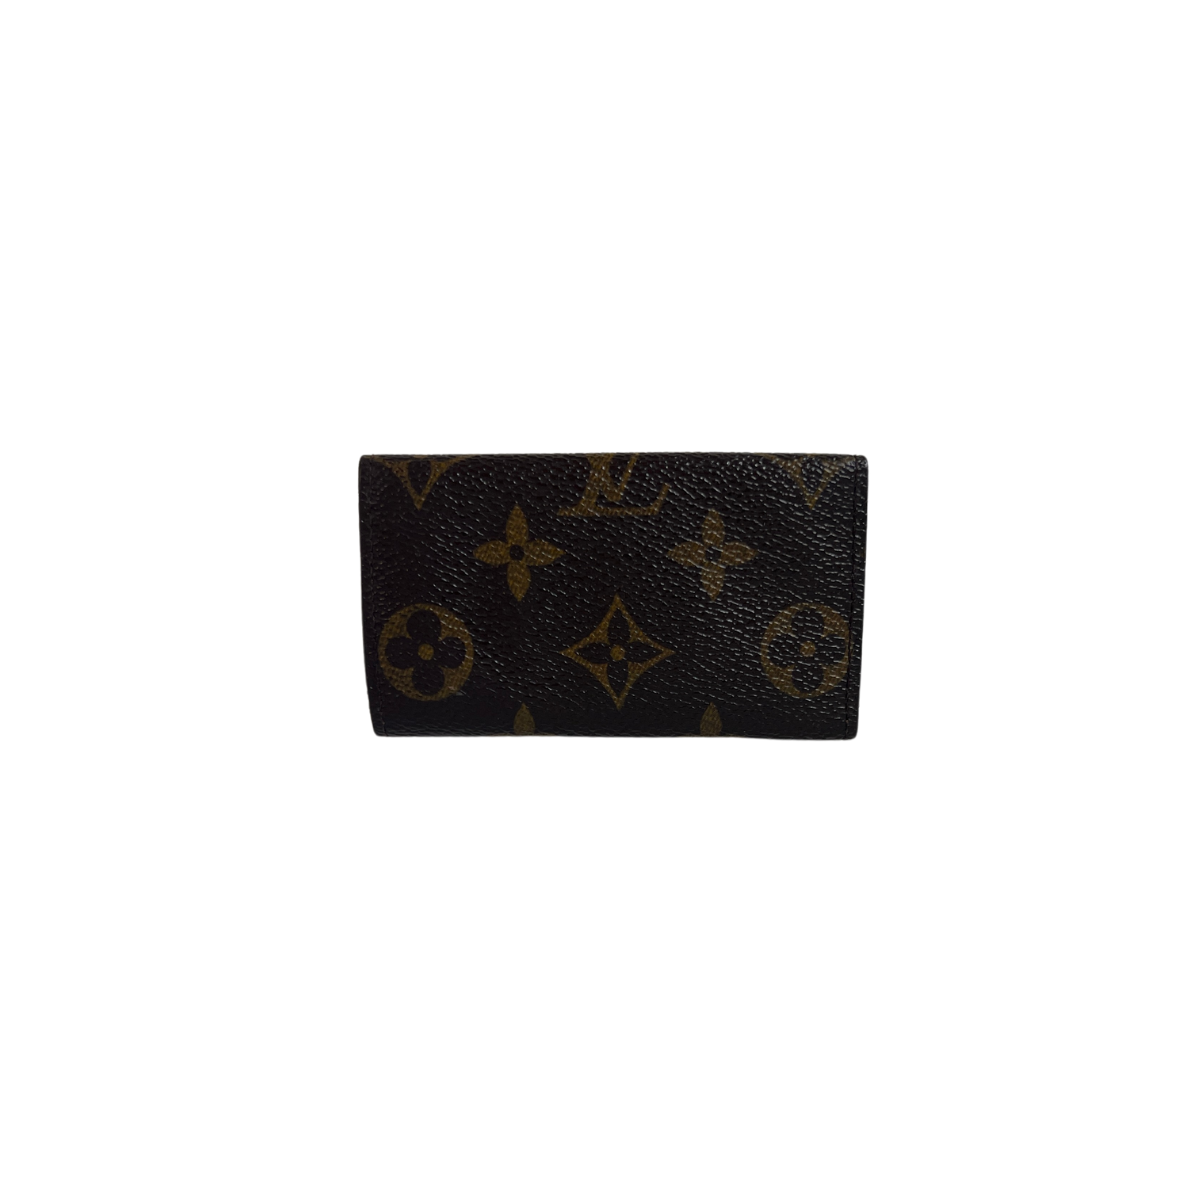 Authentic Louis Vuitton 4 key holder Monogram Canvas Made In France  eBay